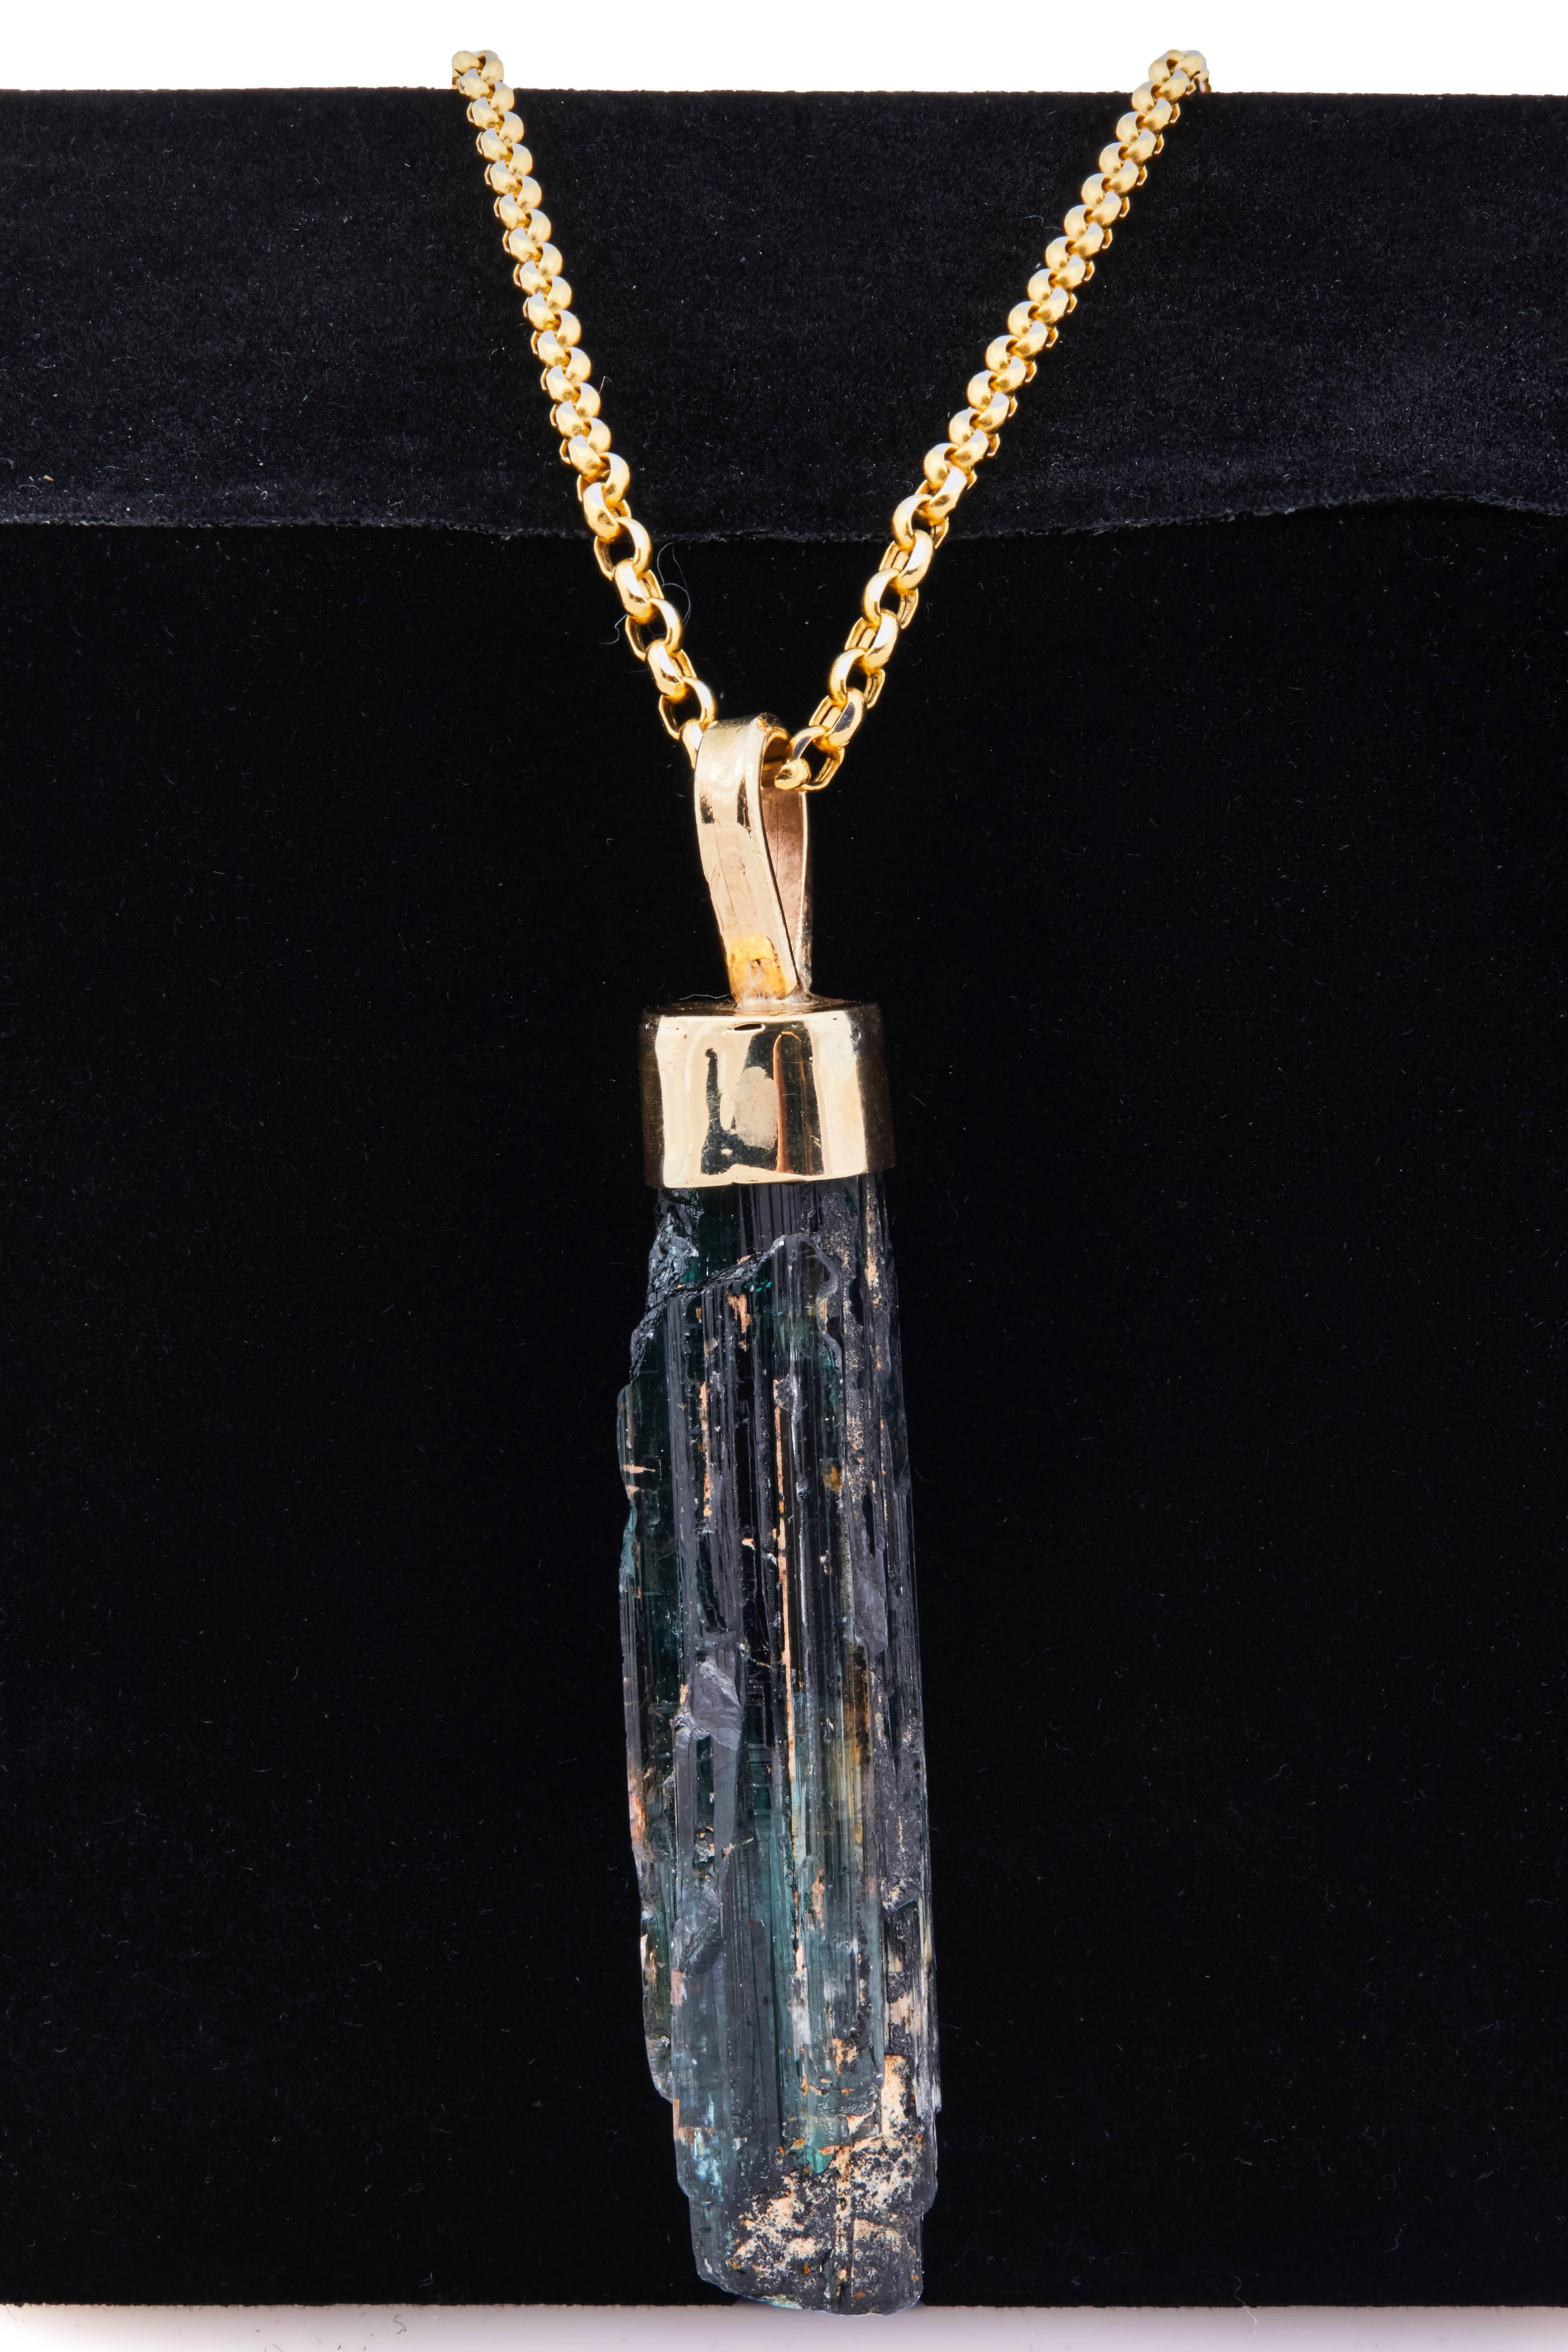 Necklace with natural tourmaline mounted in 18k gold. Italian 18k gold chain is 24